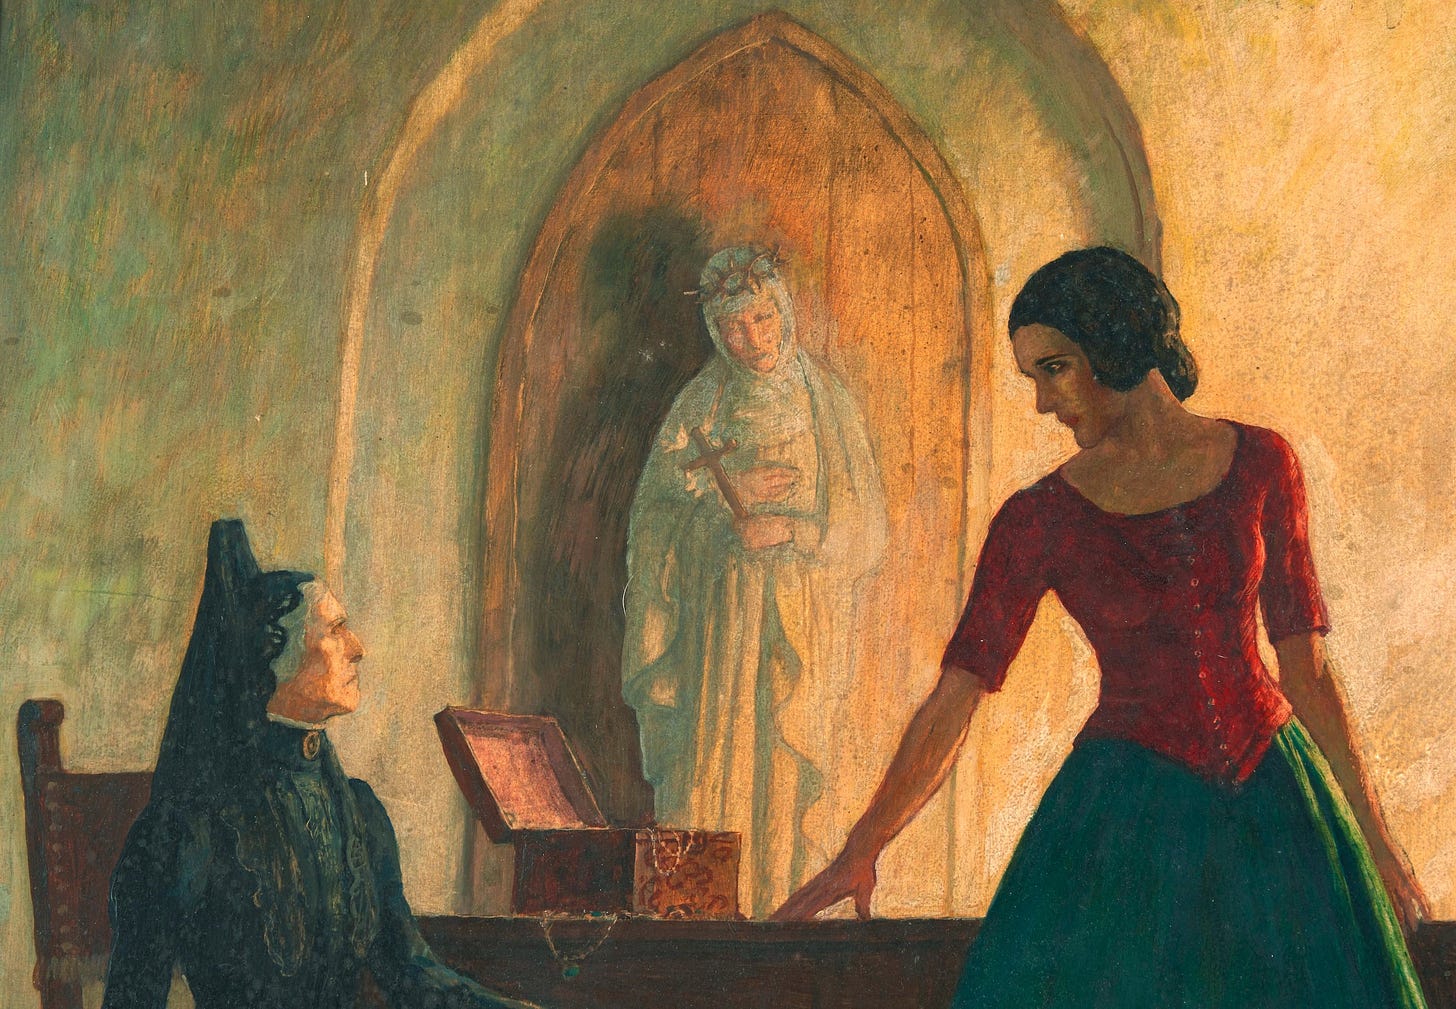 N.C. Wyeth Painting Bought at Thrift Store for $4 Could Sell for $250K